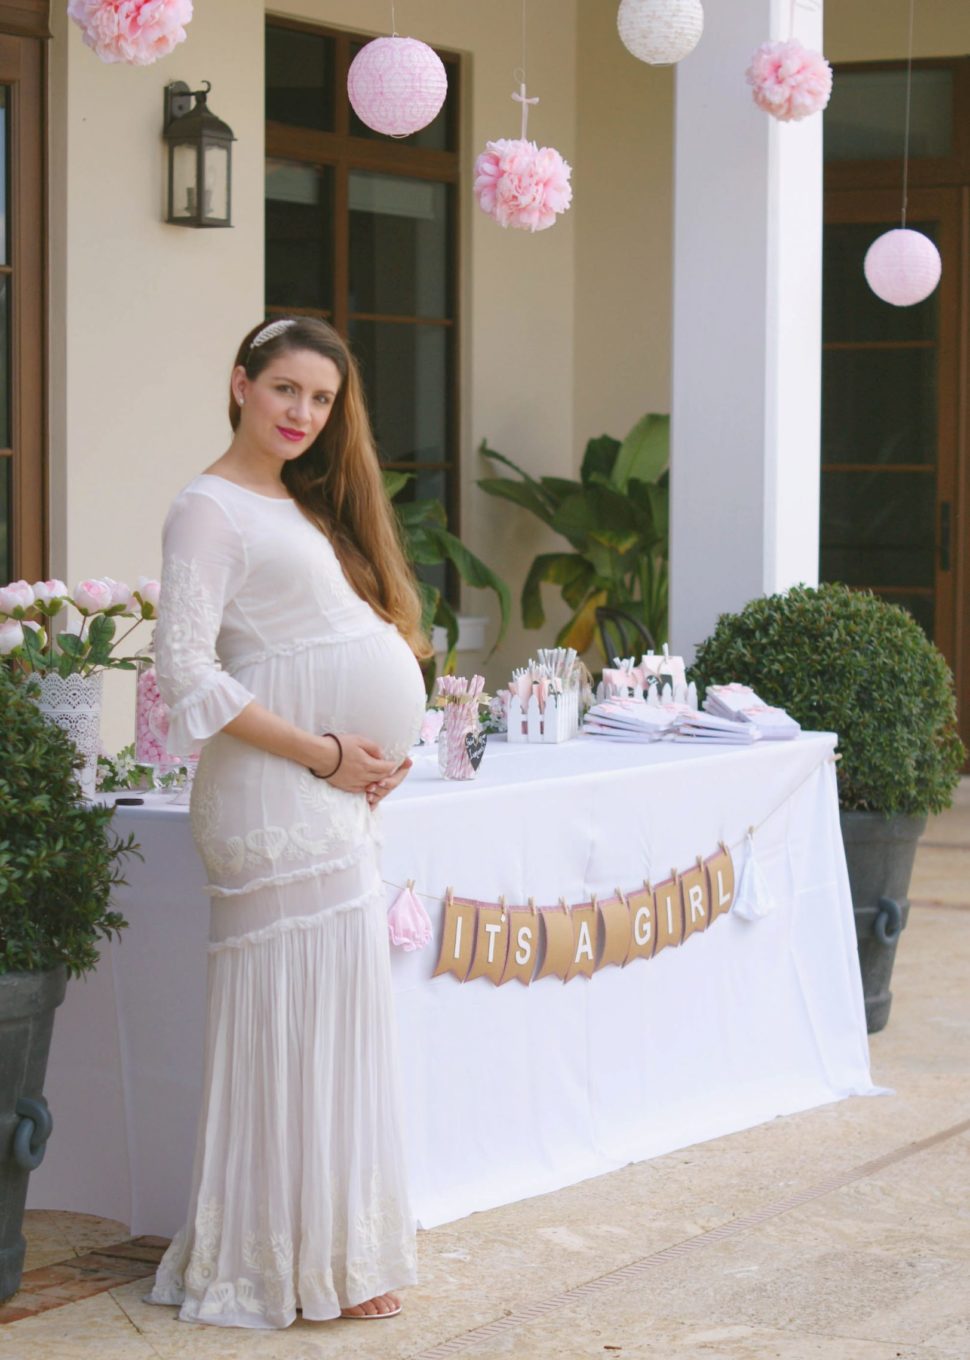 Medium Size of Baby Shower:baby Shower Dresses Indian Maternity Maxi Dress Cheap Maternity Dresses For Baby Showers Trendy Maternity Clothes Maternity Blouses For Baby Shower Plus Size Maternity Dresses For Baby Shower What Should I Wear To My Baby Shower Plus Size Maternity Clothes